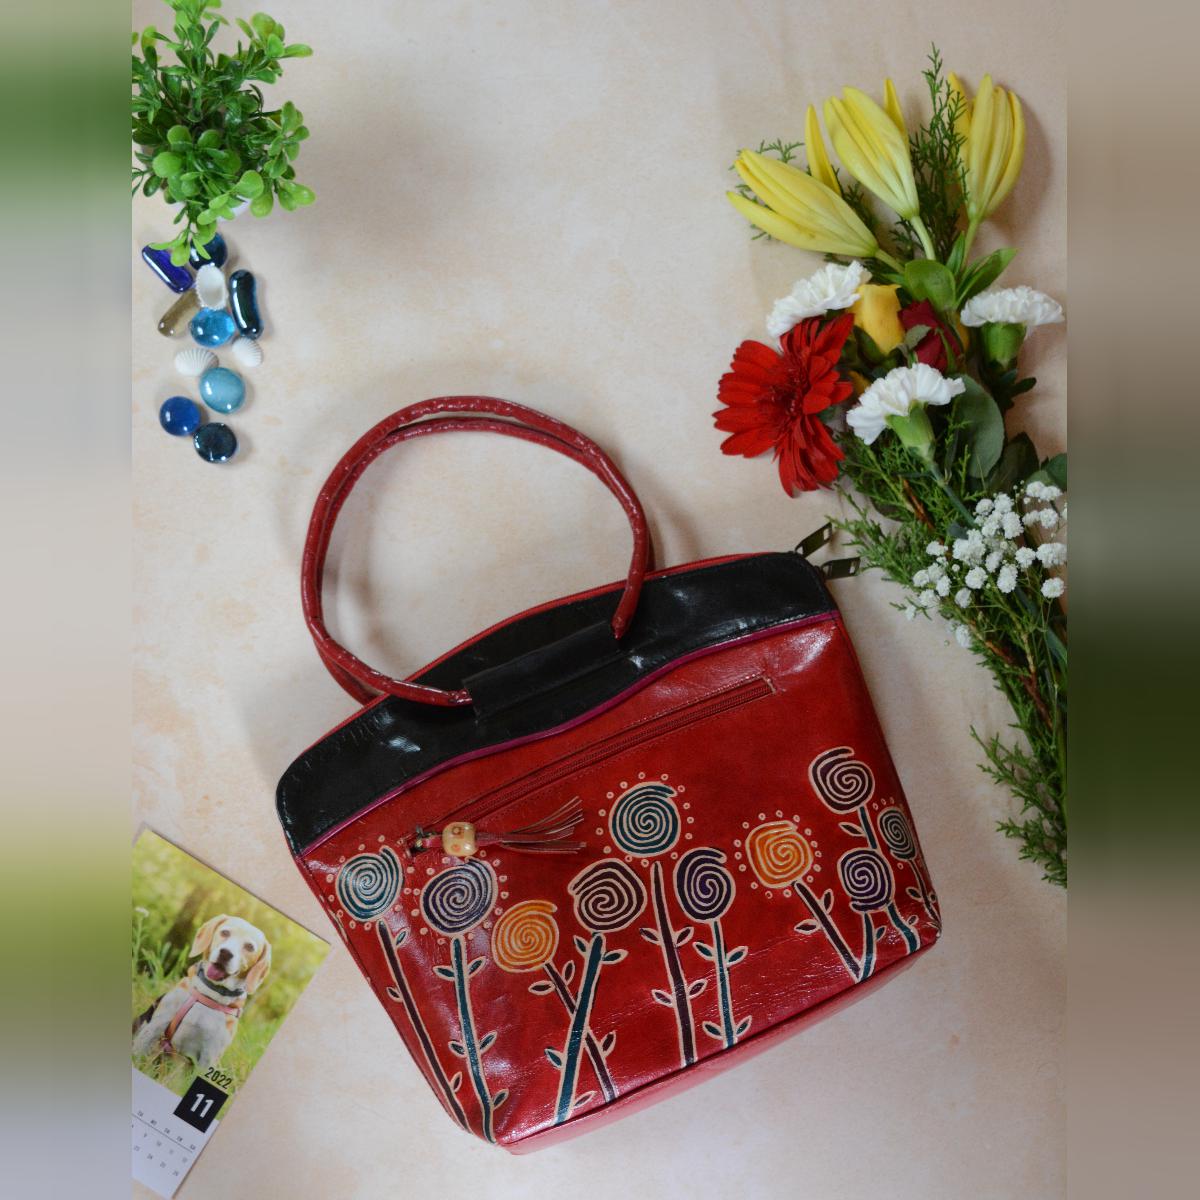 Buy ZINT HAND TOOLED PAINTED PURE LEATHER SHANTINIKETAN ETHNIC BOHO  SHOULDER BAG PURSE HANDBAG / DEER BAG Online at Low Prices in India -  Paytmmall.com